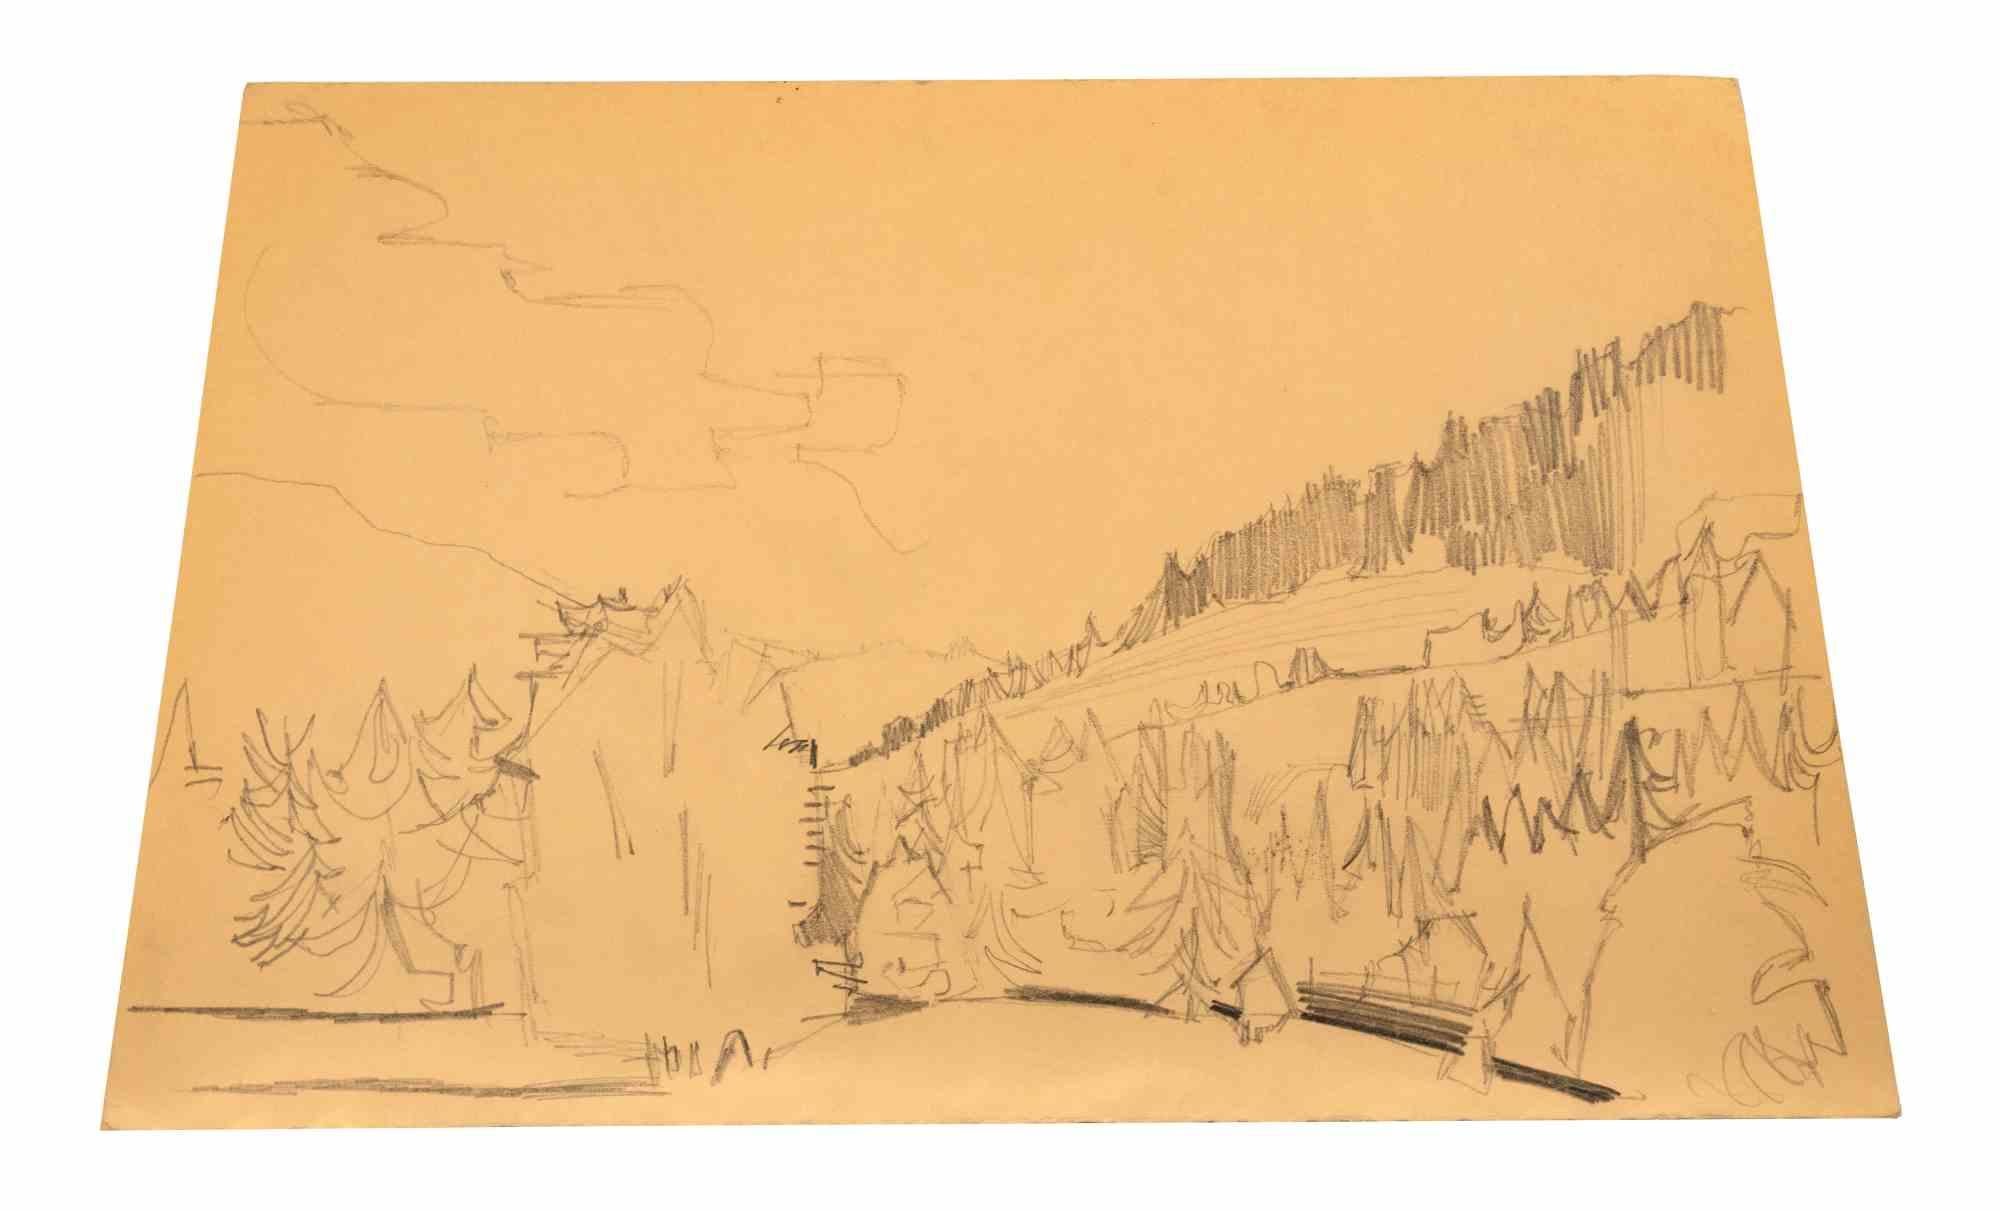 Landscape is a pencil drawing realized by  Reynold Arnould  (Le Havre 1919 - Parigi 1980).

Good condition on a yellowed paper.

No signature.

Reynold Arnould was born in Le Havre, France in 1919. He studied at l'École des Beaux-Arts de Le Havre,